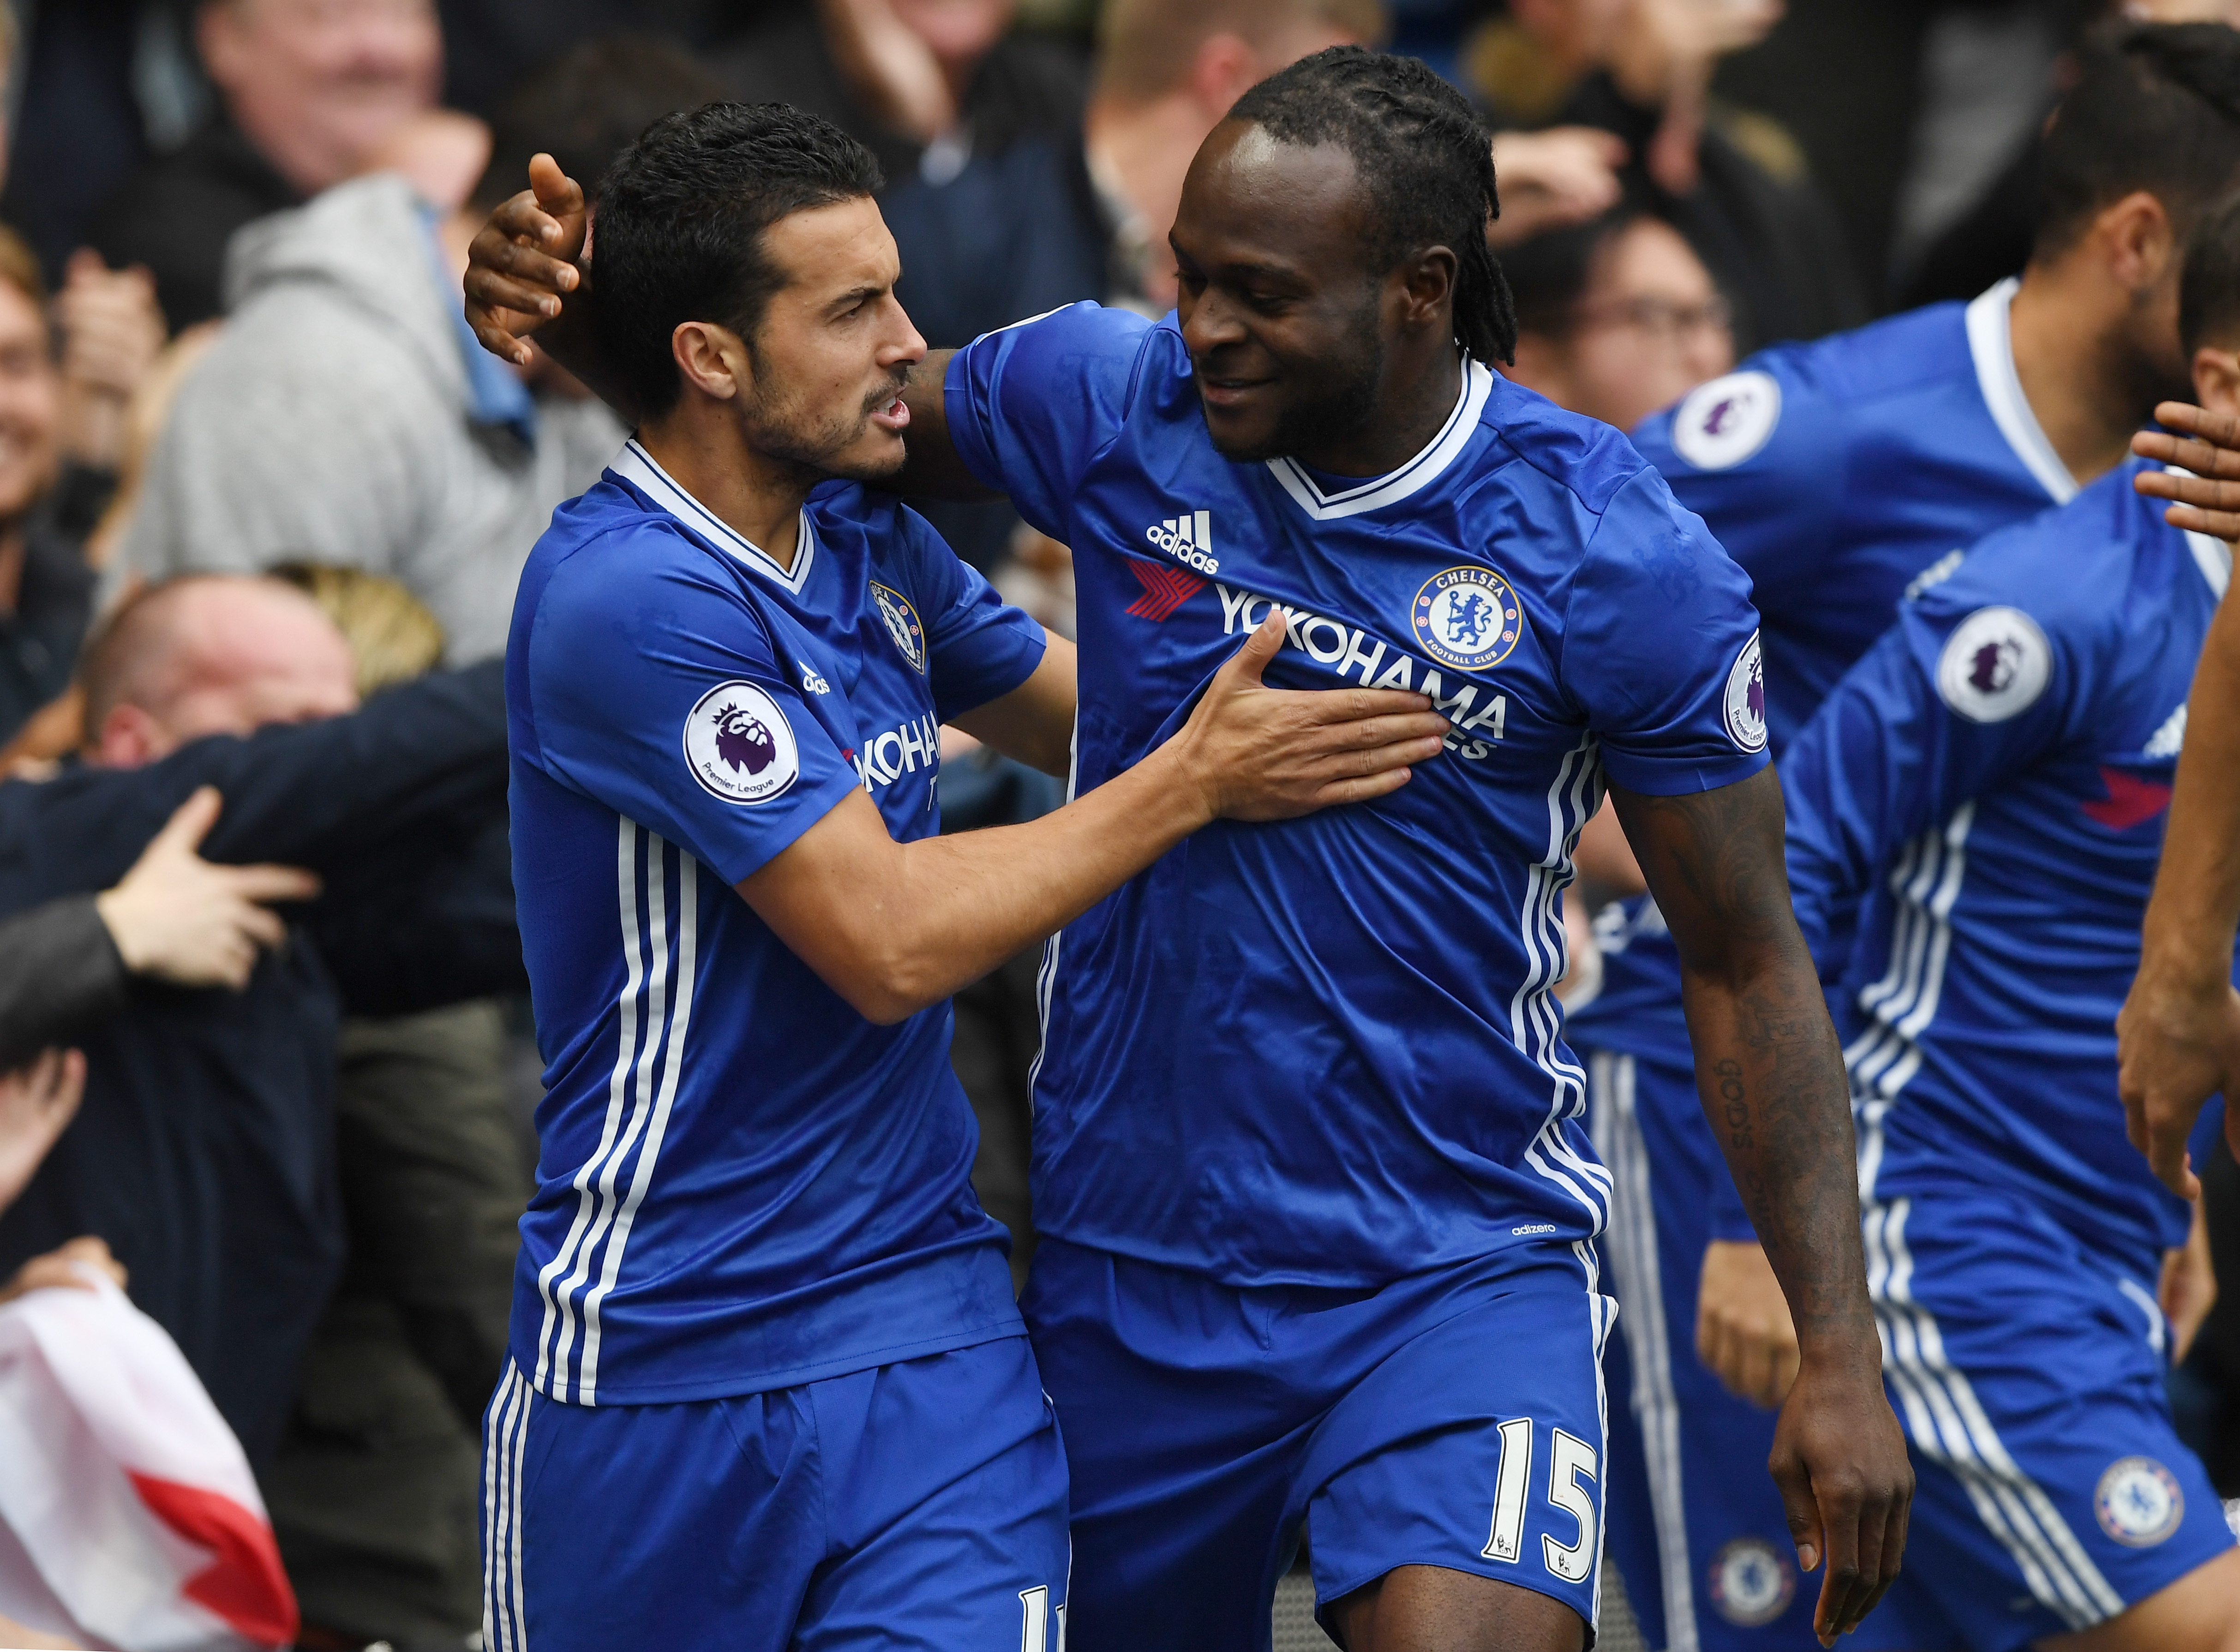 LONDON, ENGLAND - OCTOBER 23: Pedro of Chelsea celebrates scoring his sides first goal with Victor Moses of Chelsea during the Premier League match between Chelsea and Manchester United at Stamford Bridge on October 23, 2016 in London, England. (Photo by Shaun Botterill/Getty Images)